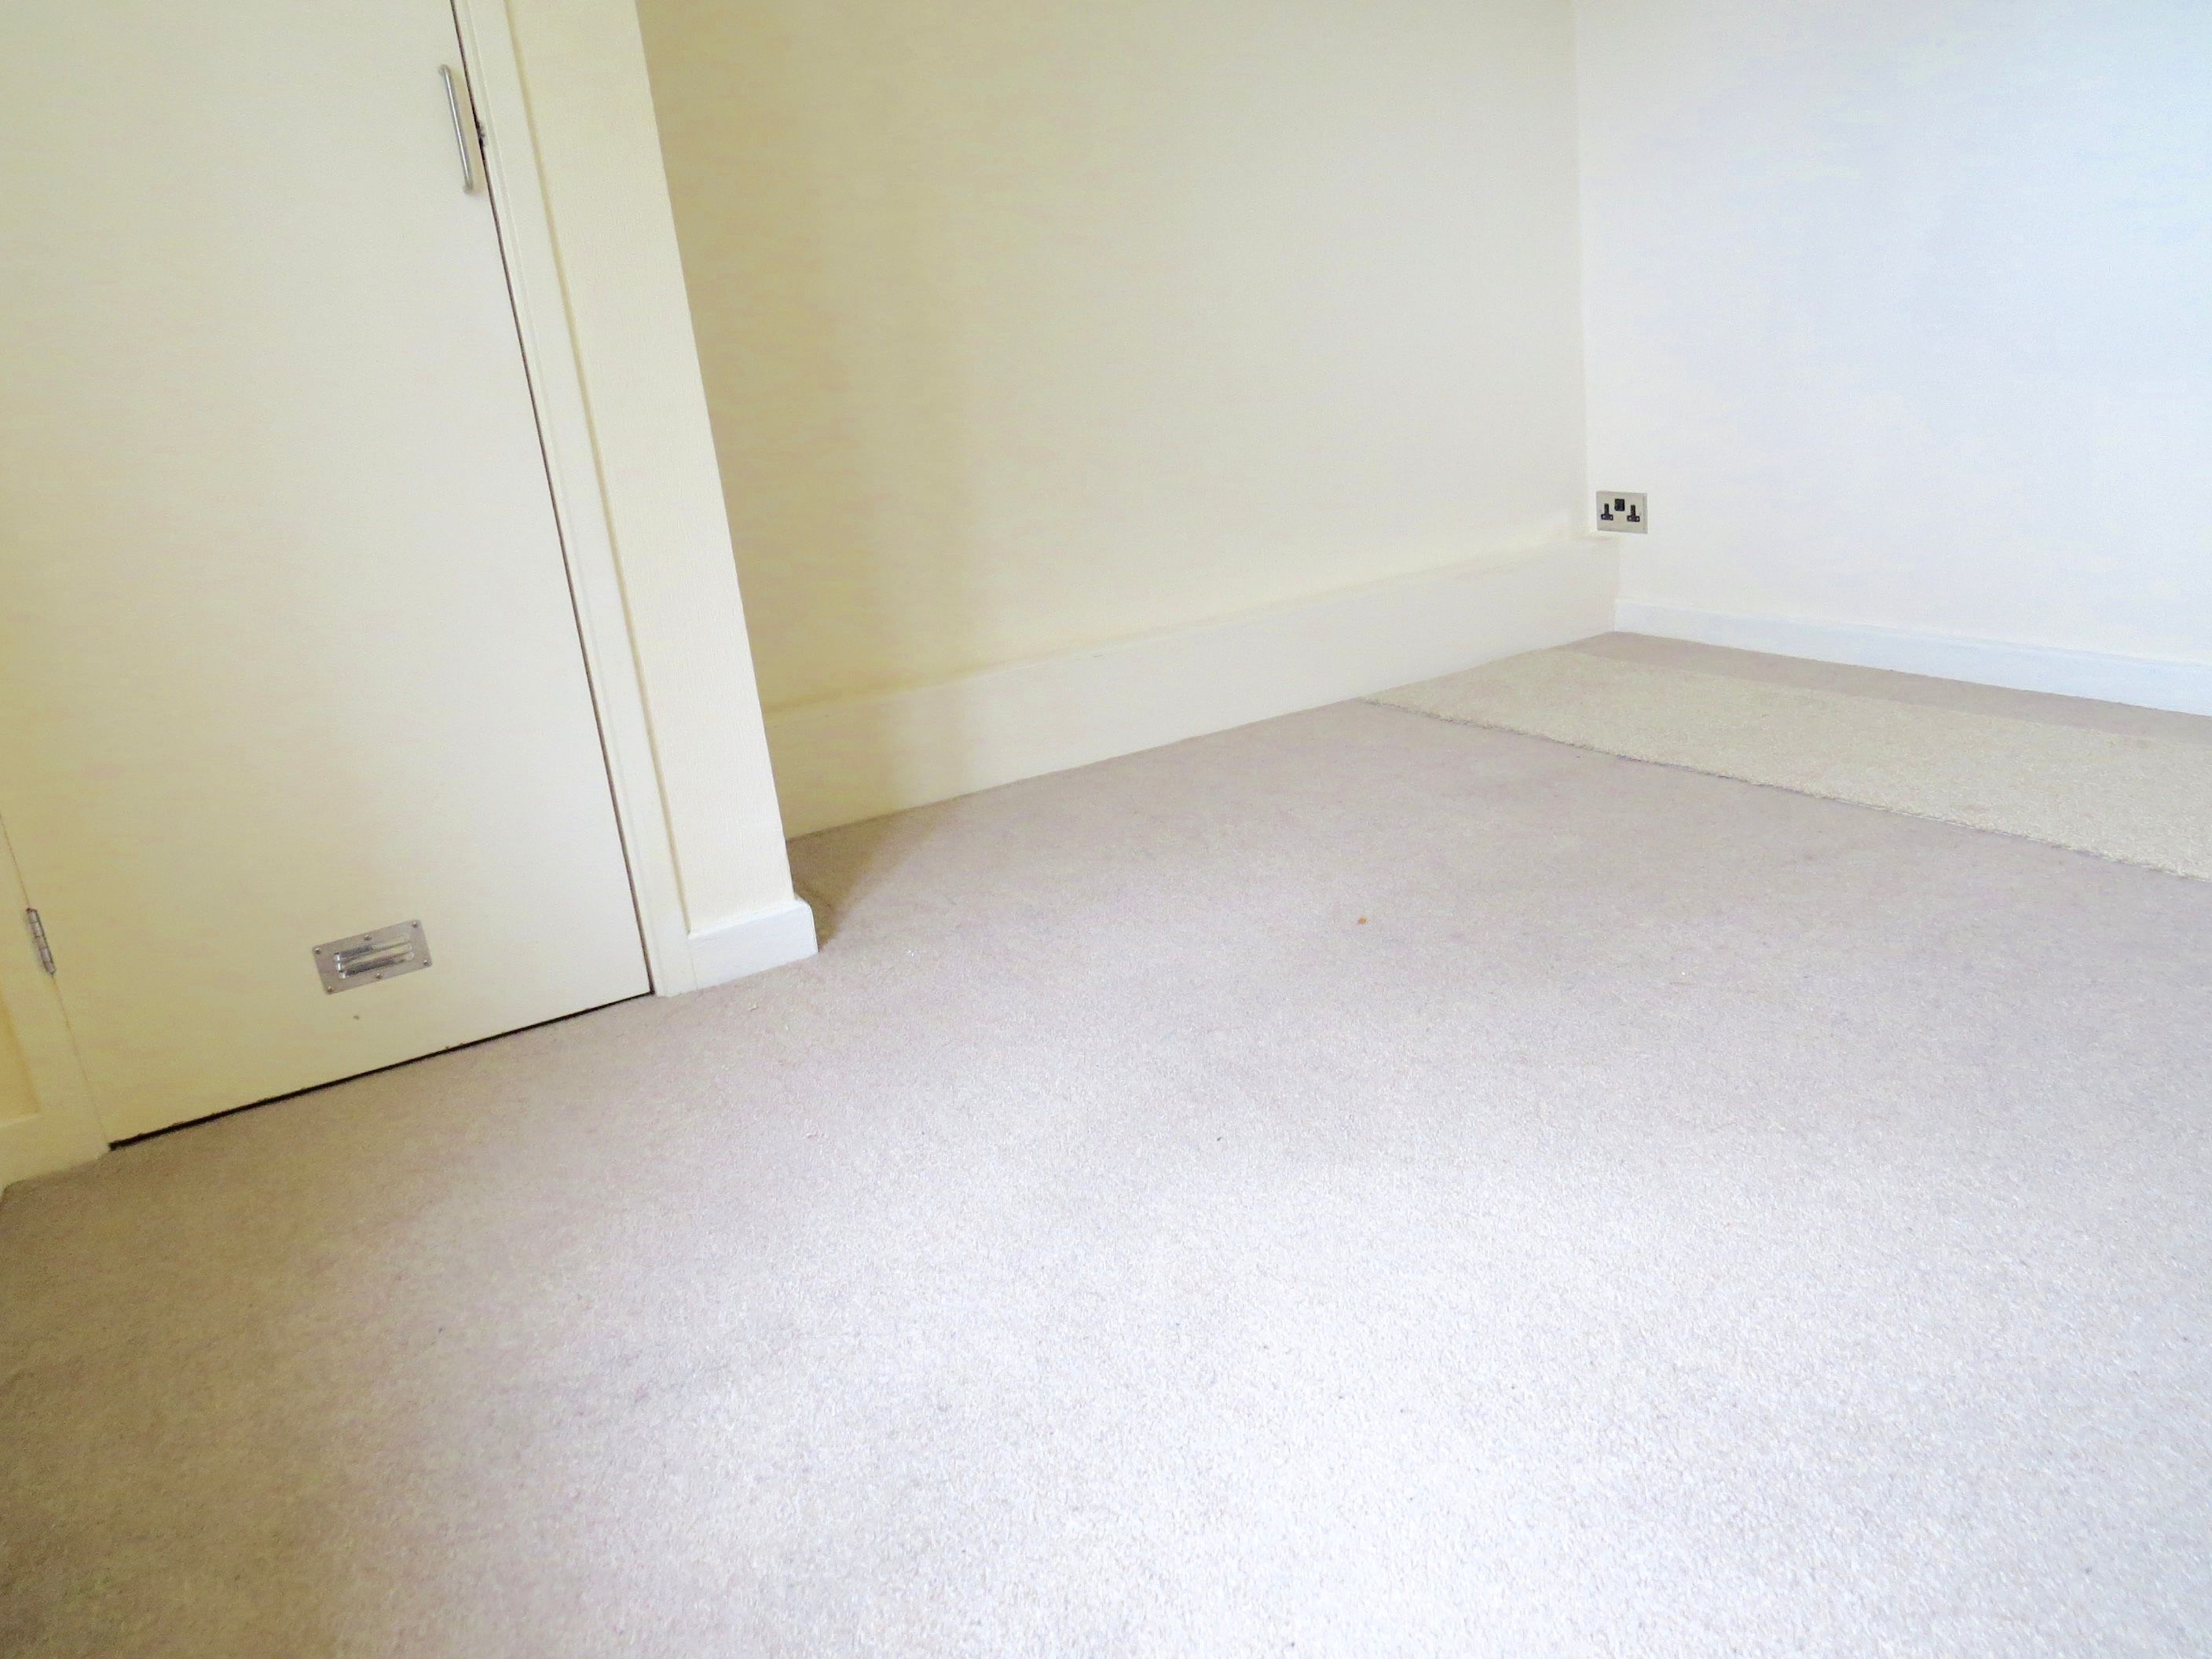 2 Bedroom Flat To Rent Mansfield Heights Great North Road